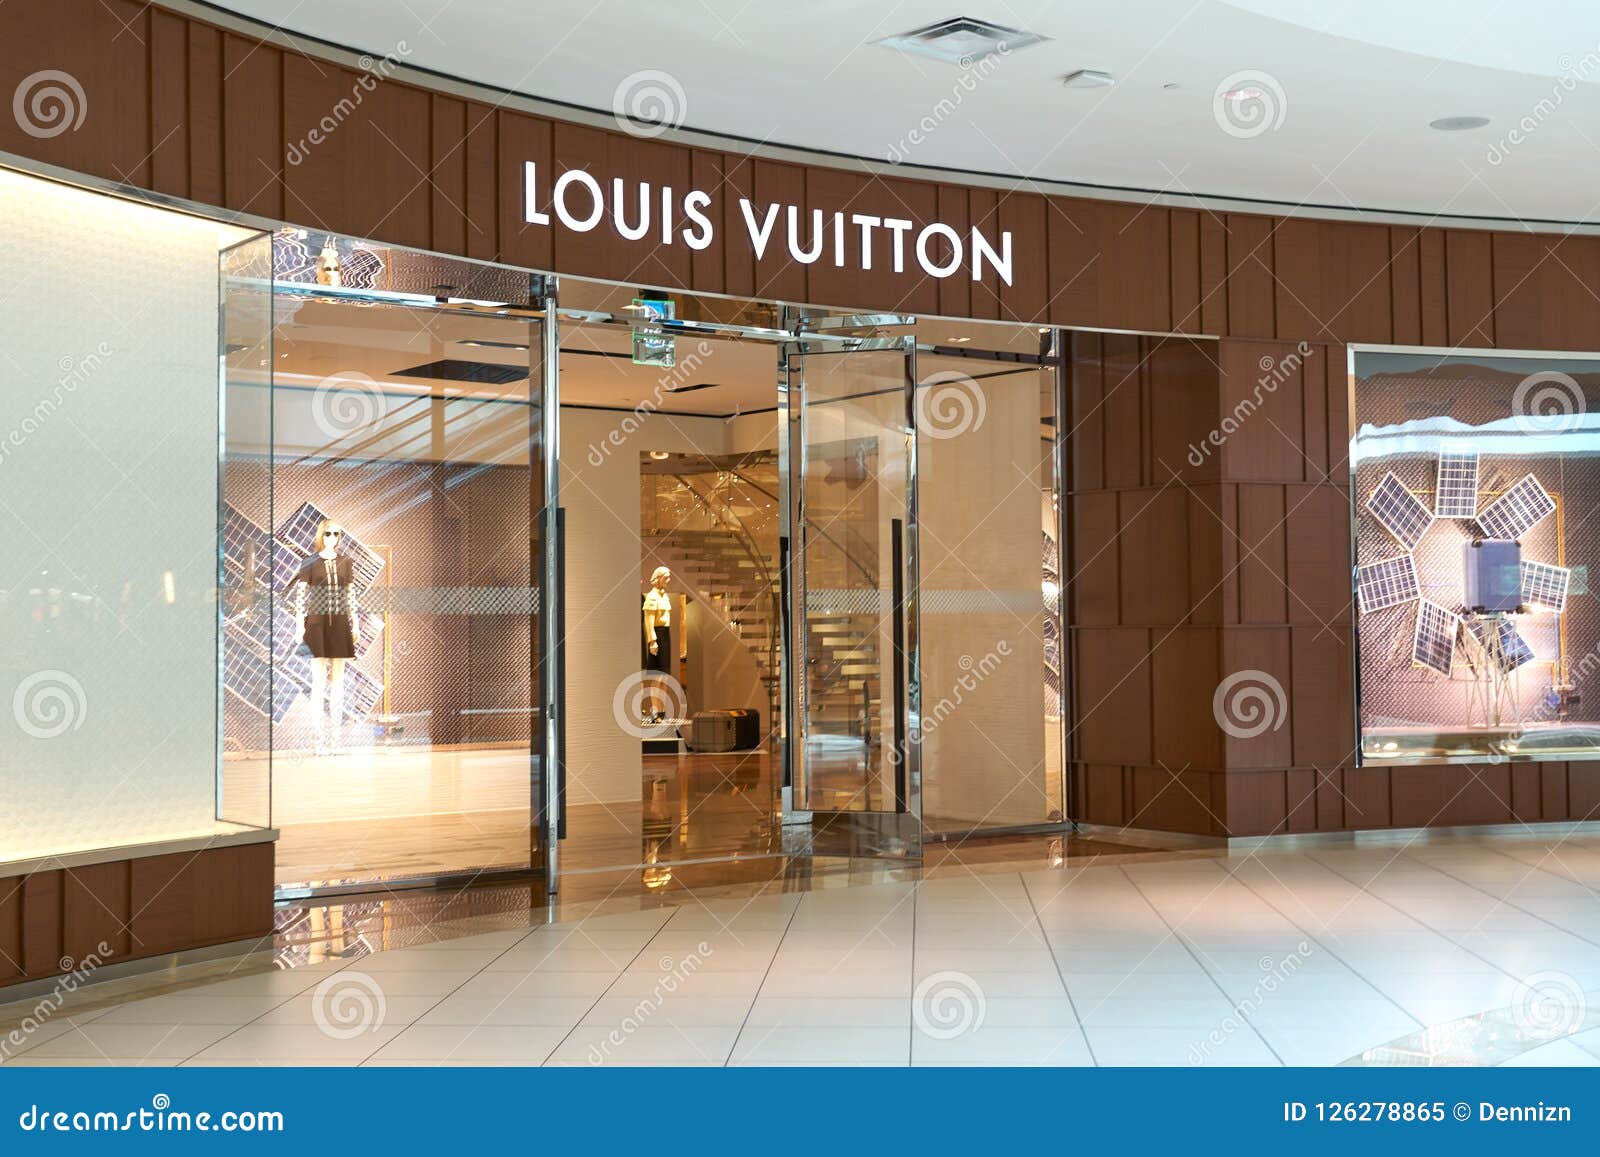 Louis Vuitton Famous Boutique. Editorial Image - Image of customer, florida: 126278865